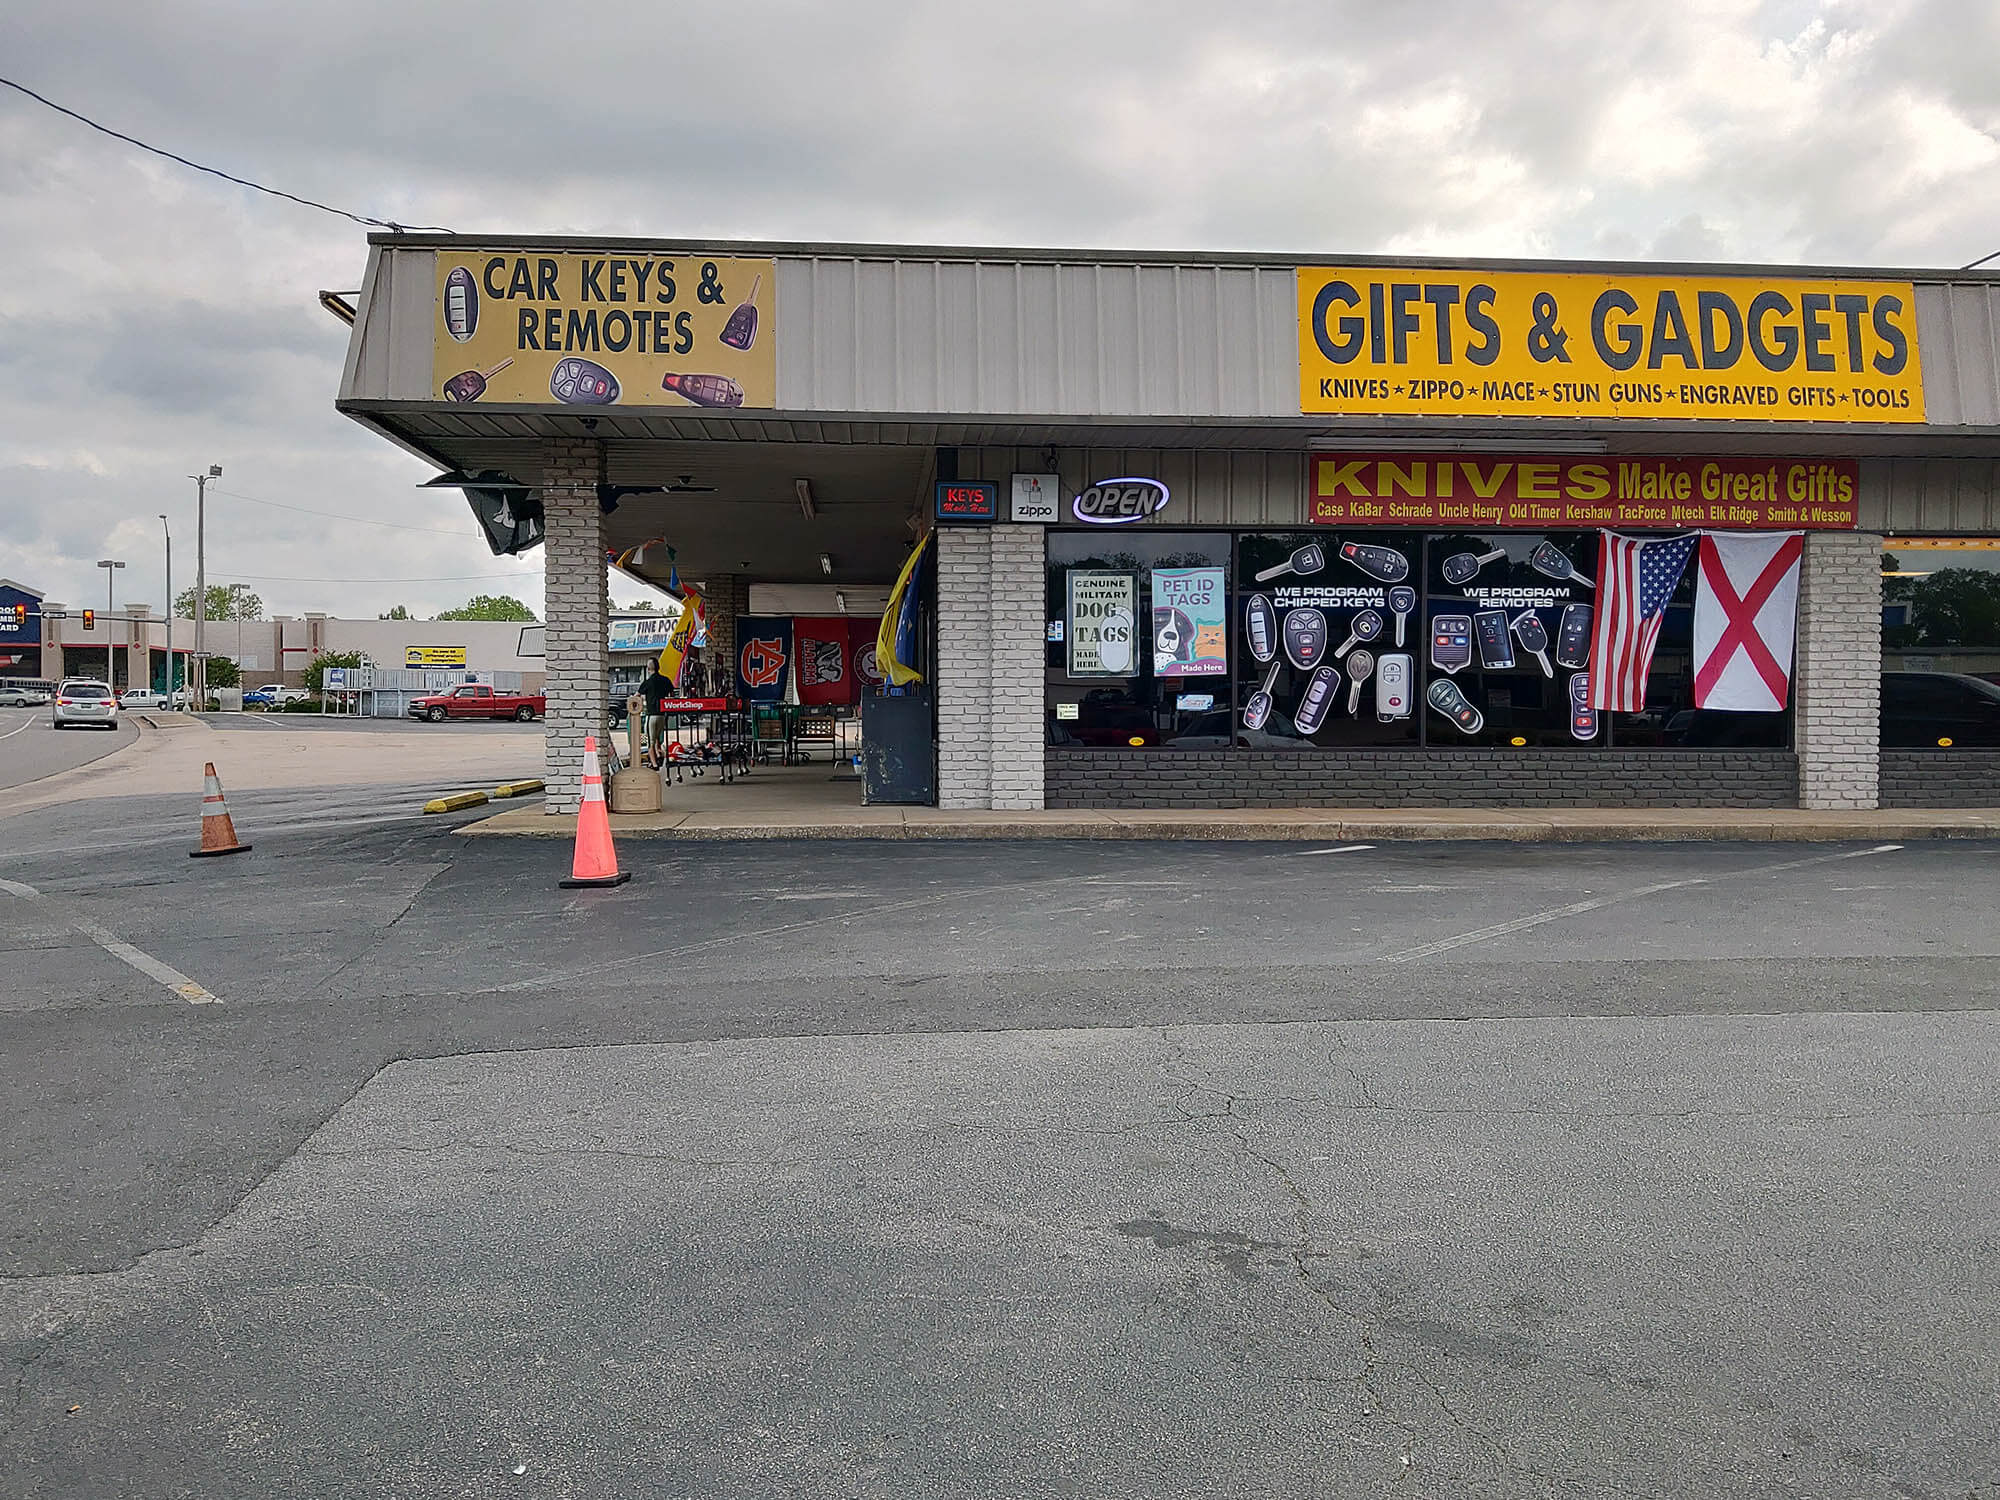 Gifts and Gadgets storefront